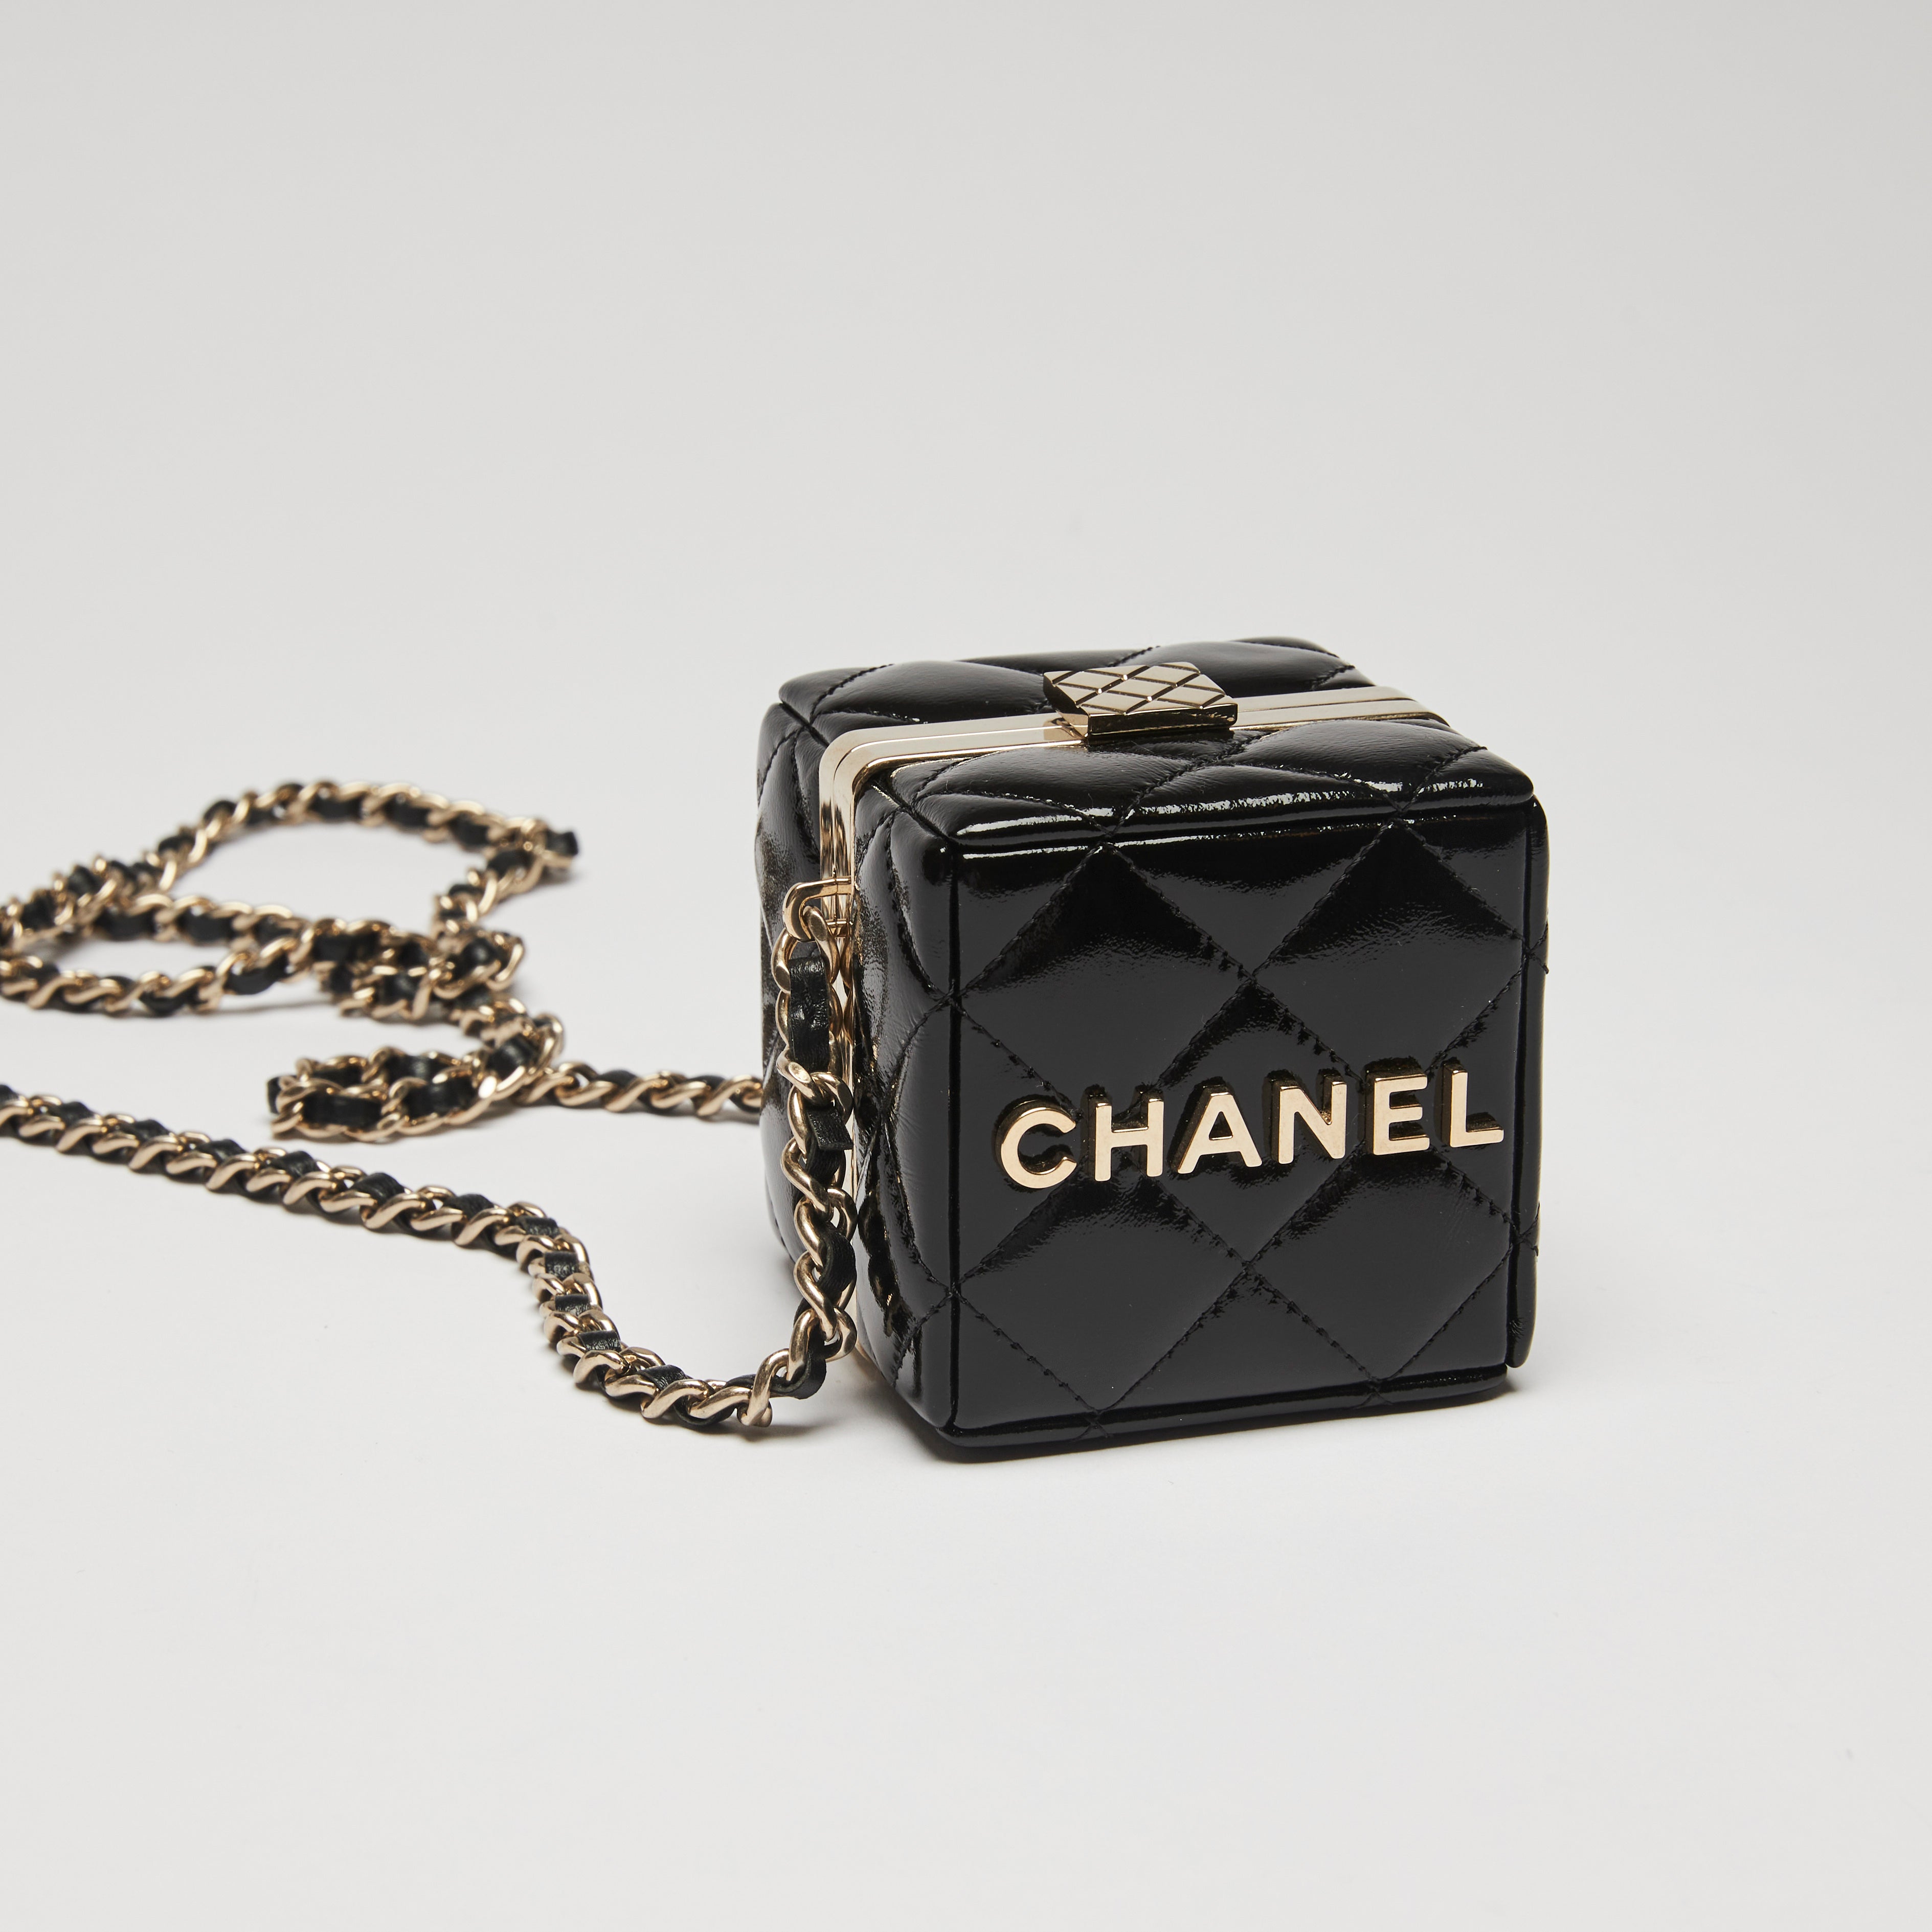 CHANEL Record Motif Chain Clutch Bag Black Red Patent Leather